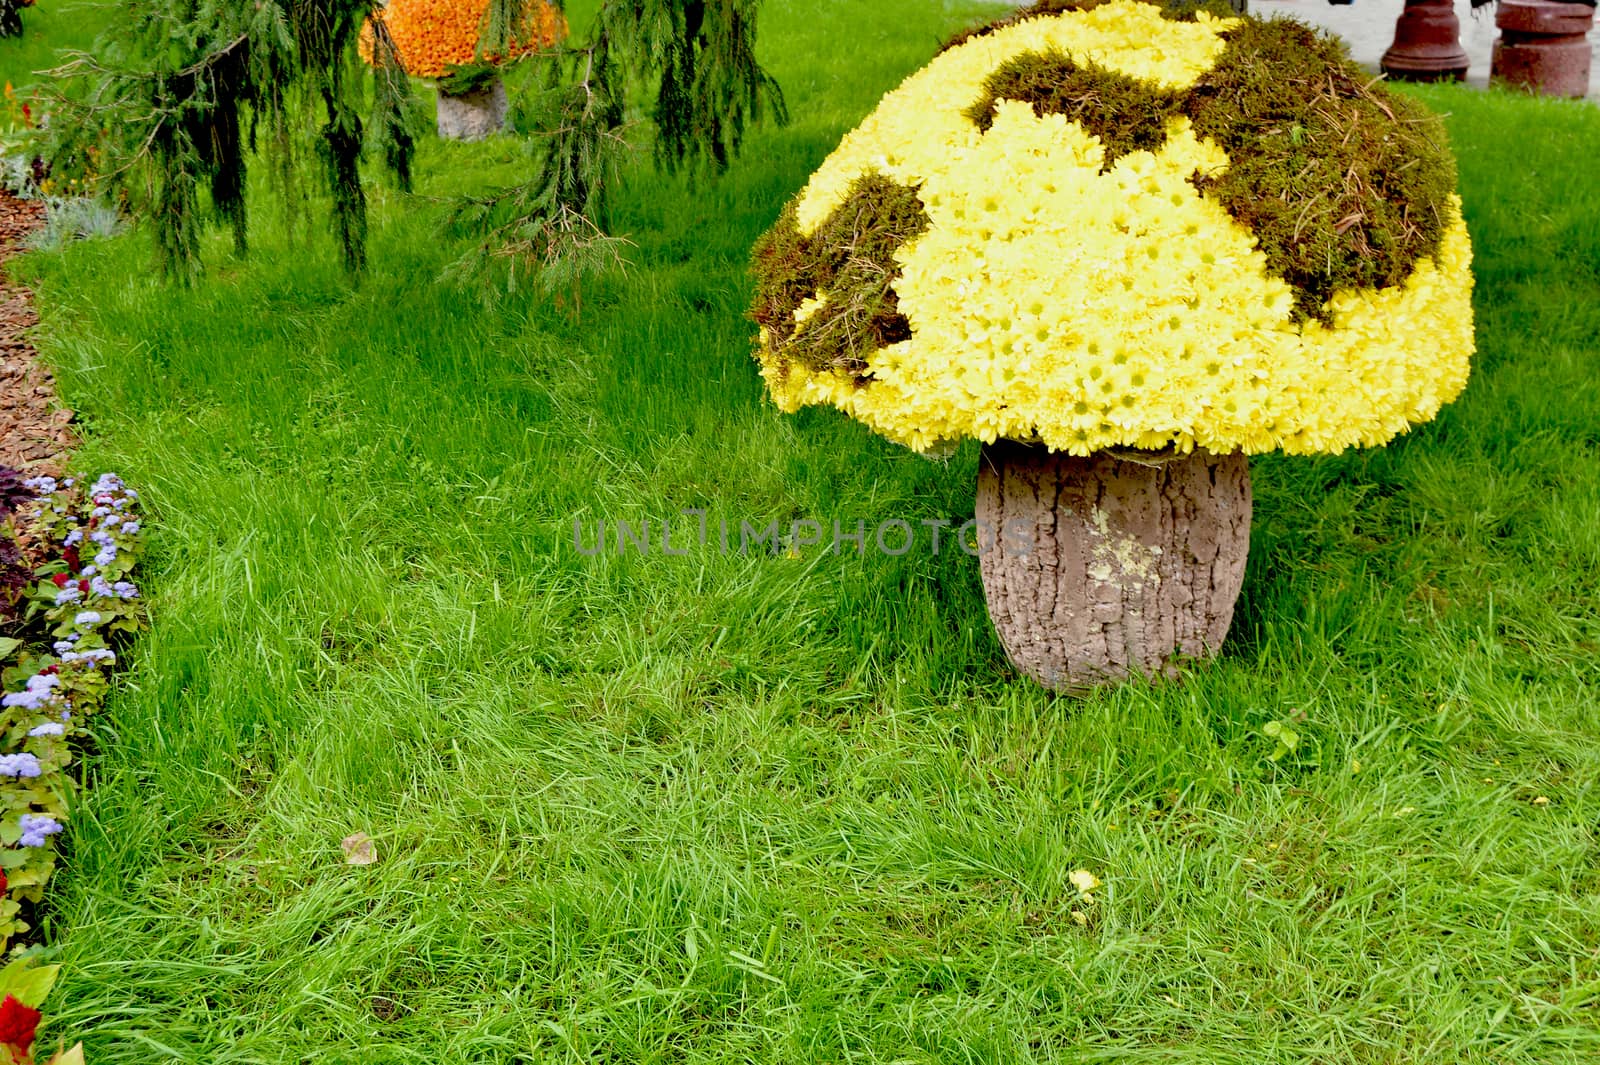 Mushroom, made of flowers, beautiful garden design by claire_lucia